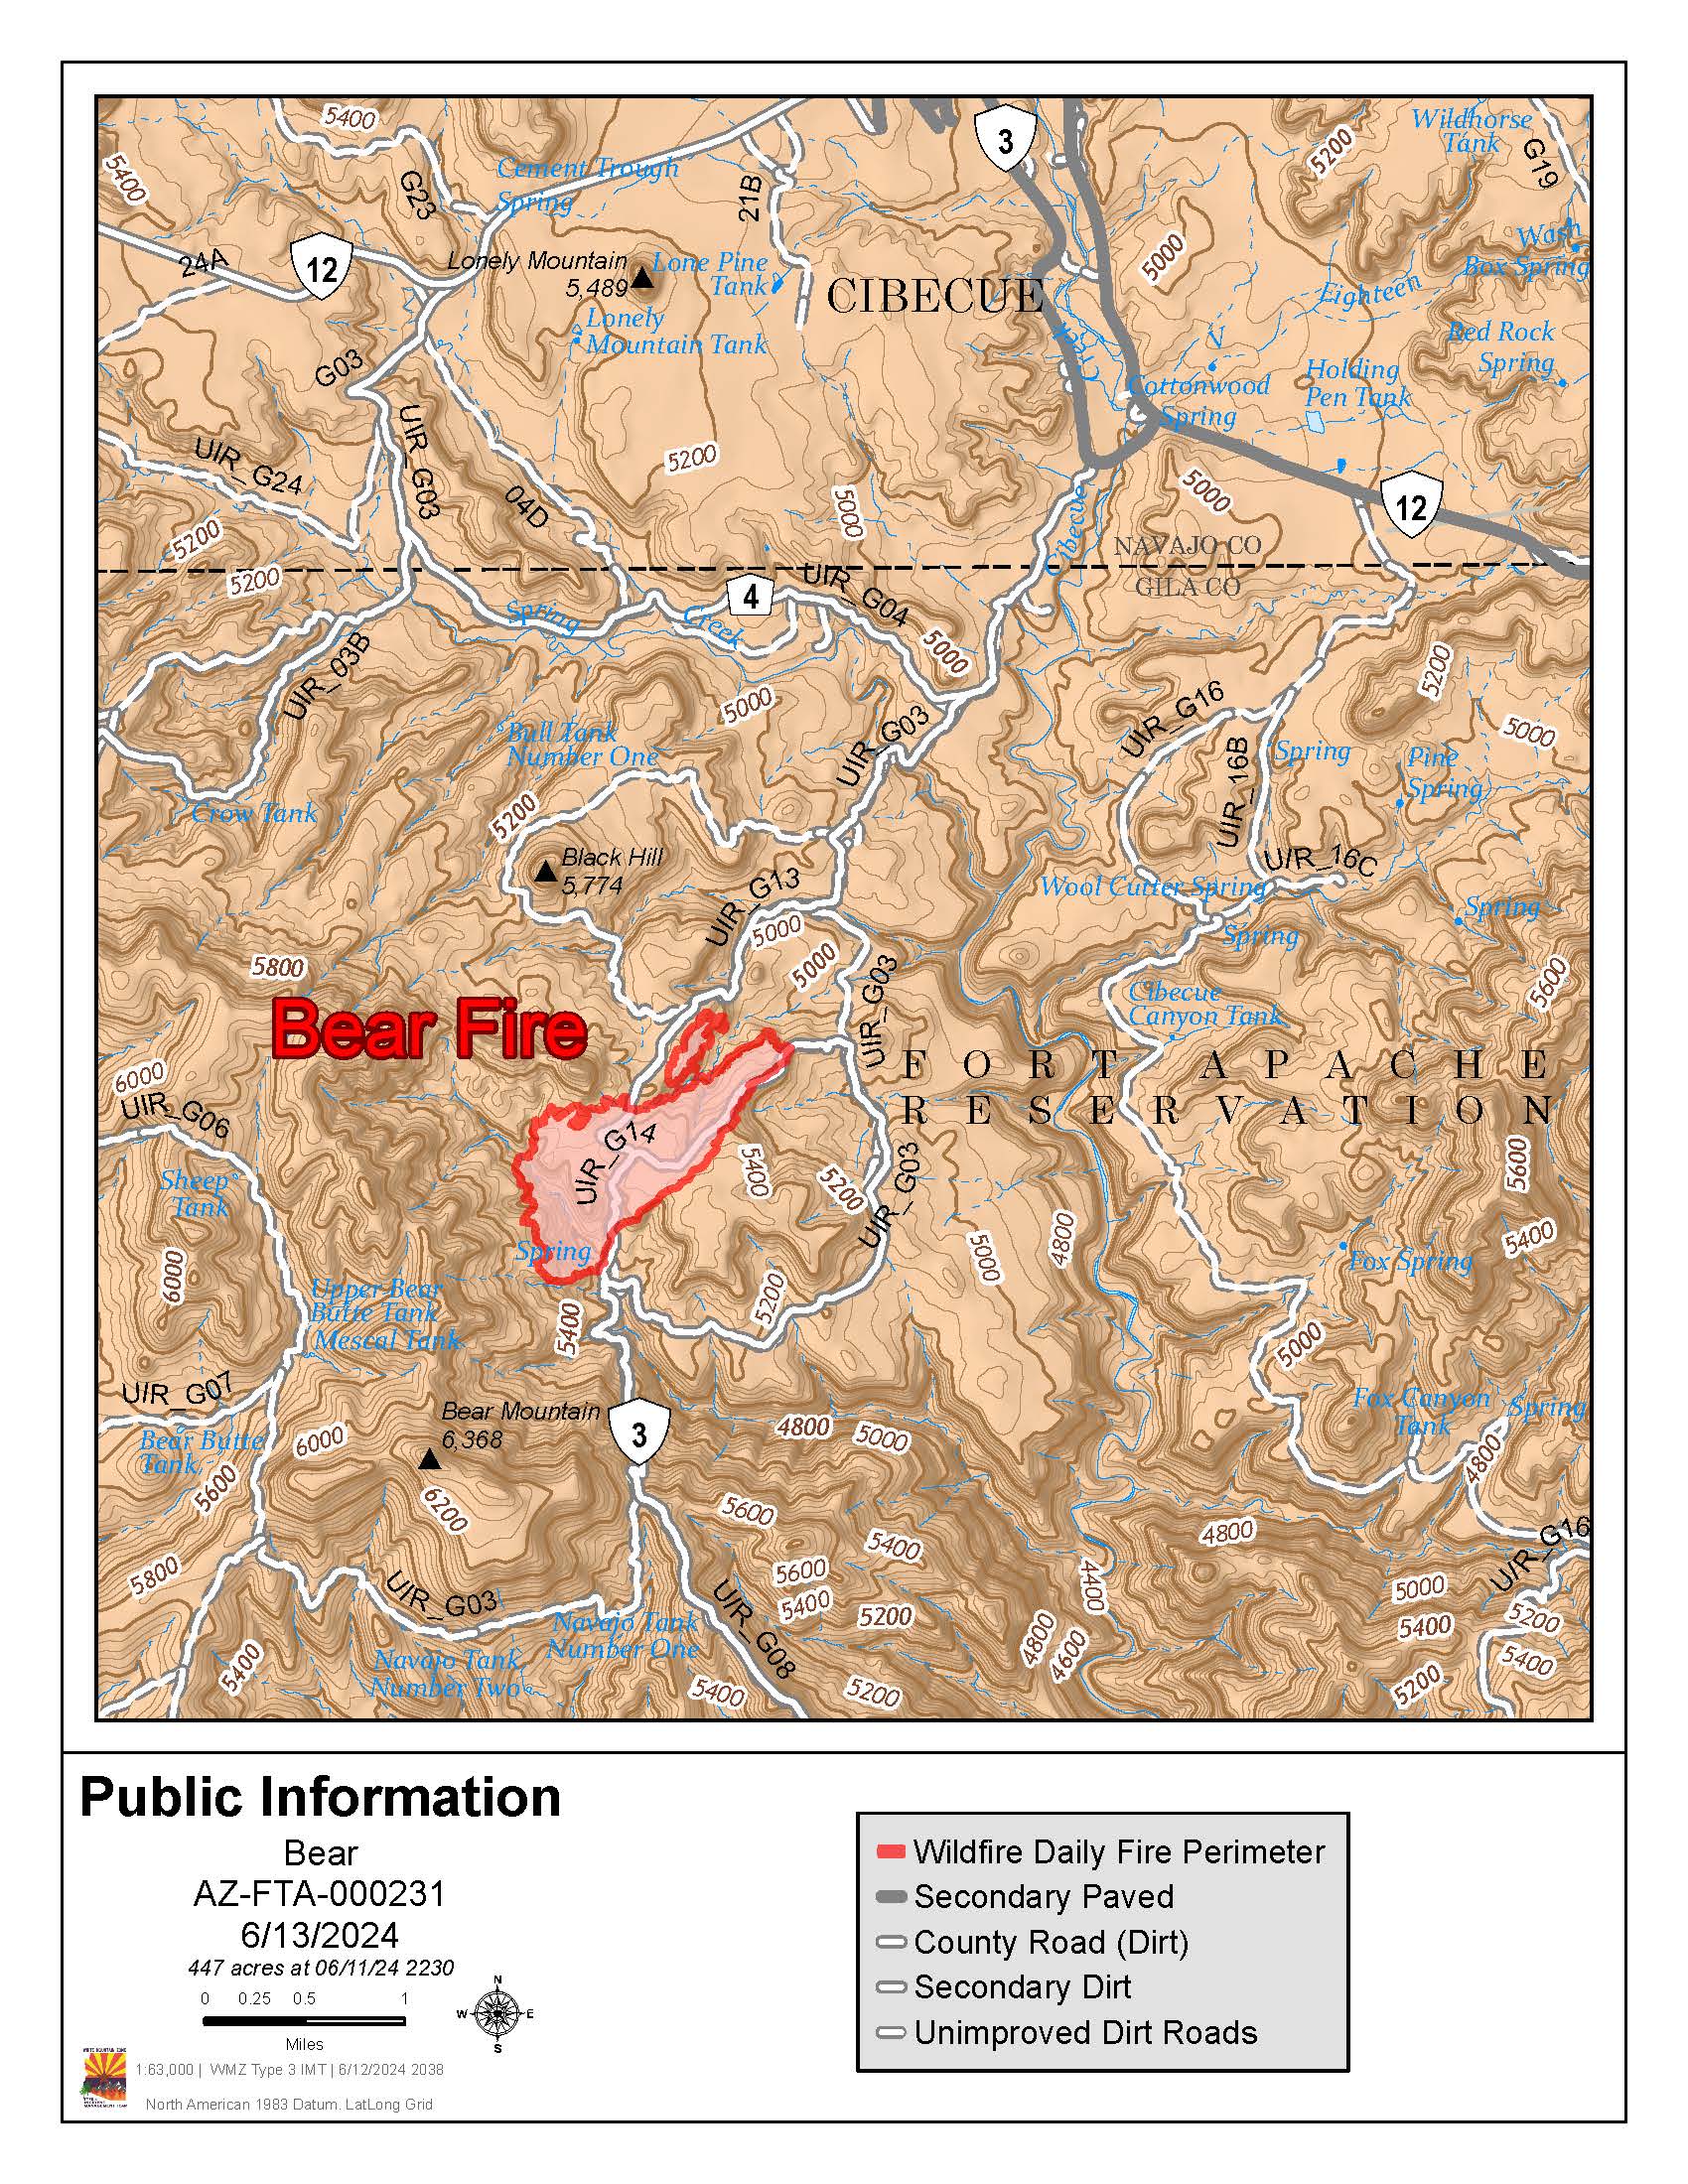 This is a map of the Bear Fire on June 13 2024